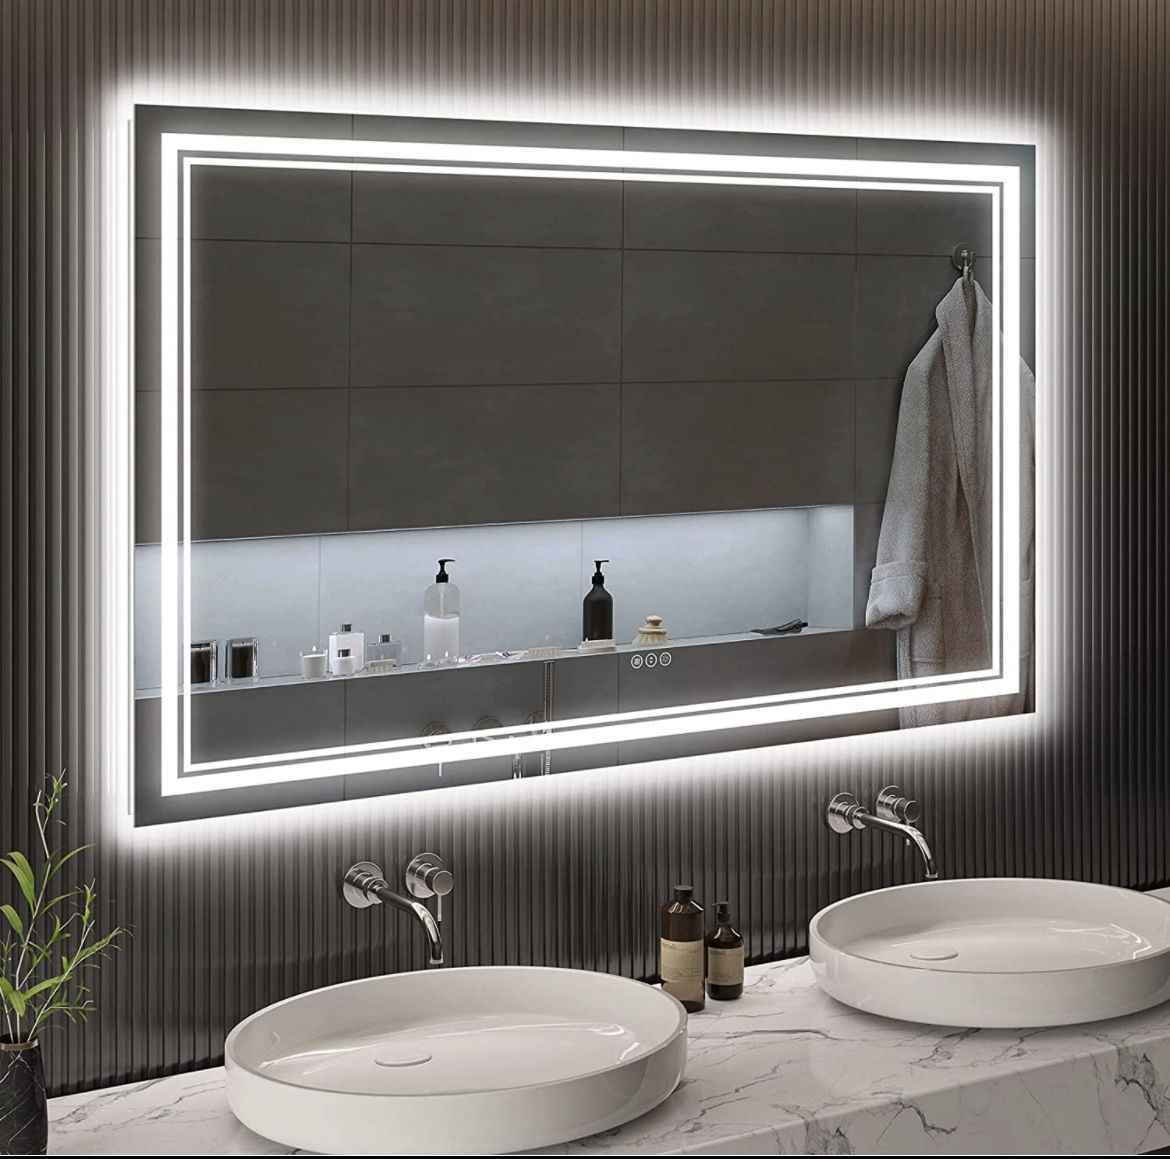  LED Mirror for Bathroom 60 x 36 with Front and Backlit, 3 Colors Dimmable Lighted Vanity Mirror for Wall, Large Anti-Fog Bathroom Mirror with Lights,